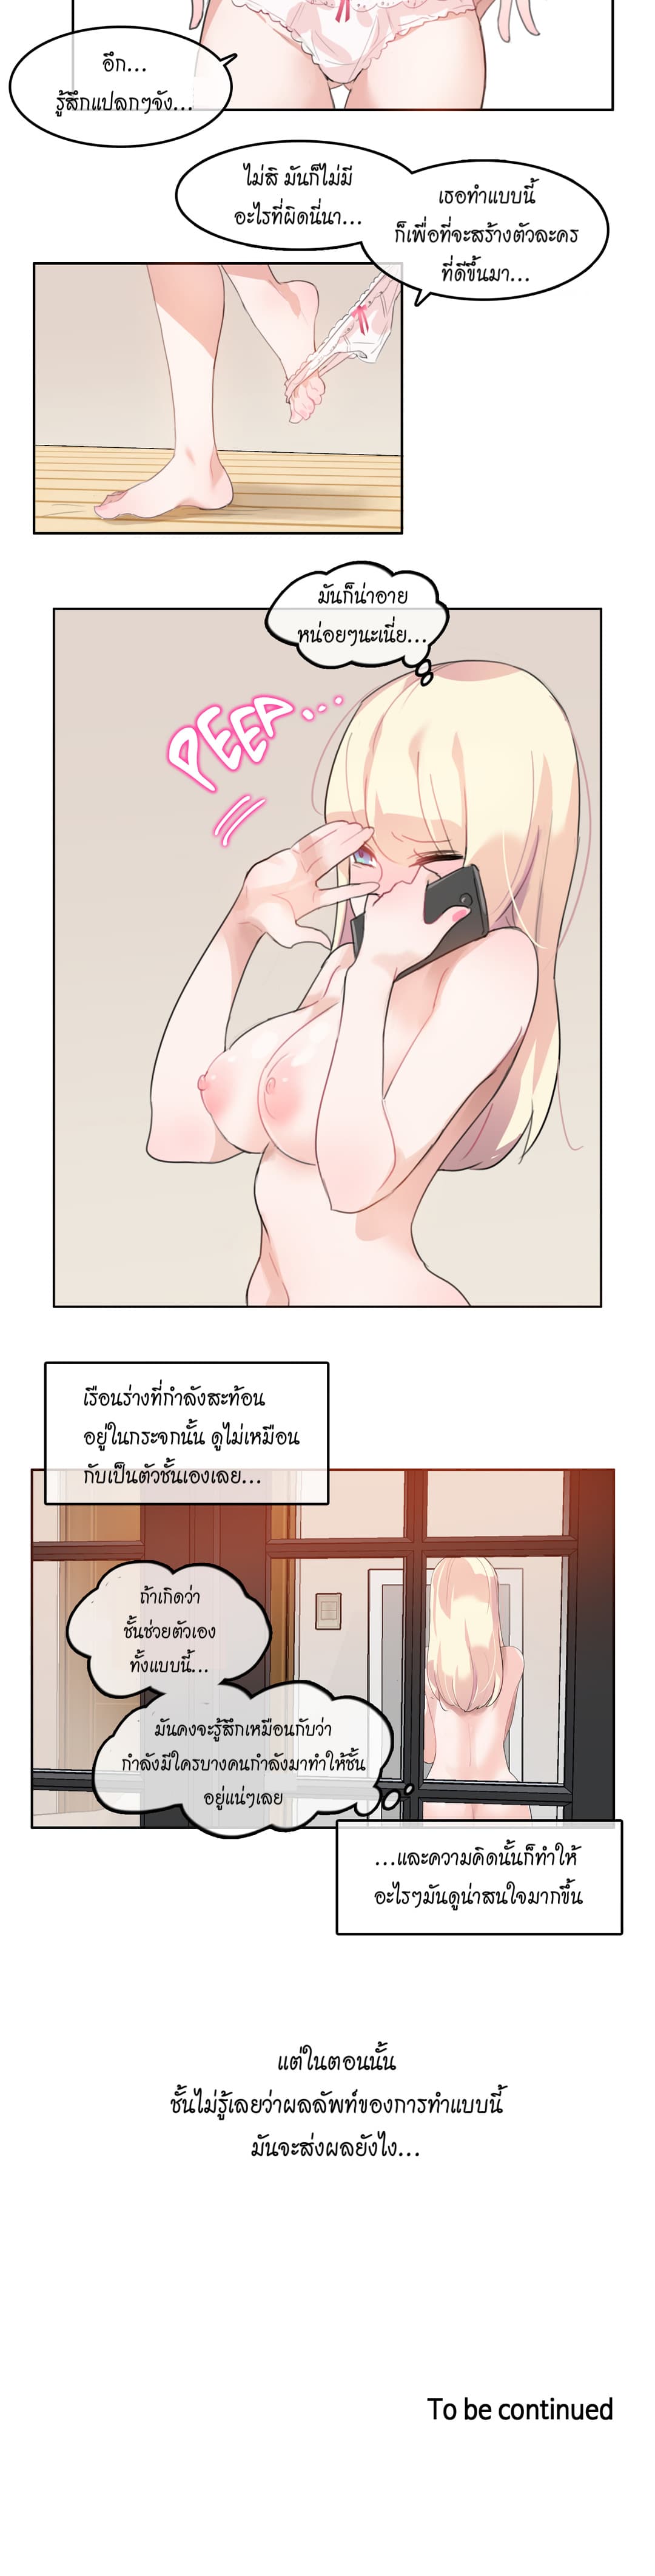 A Pervert’s Daily Life 6 (22)